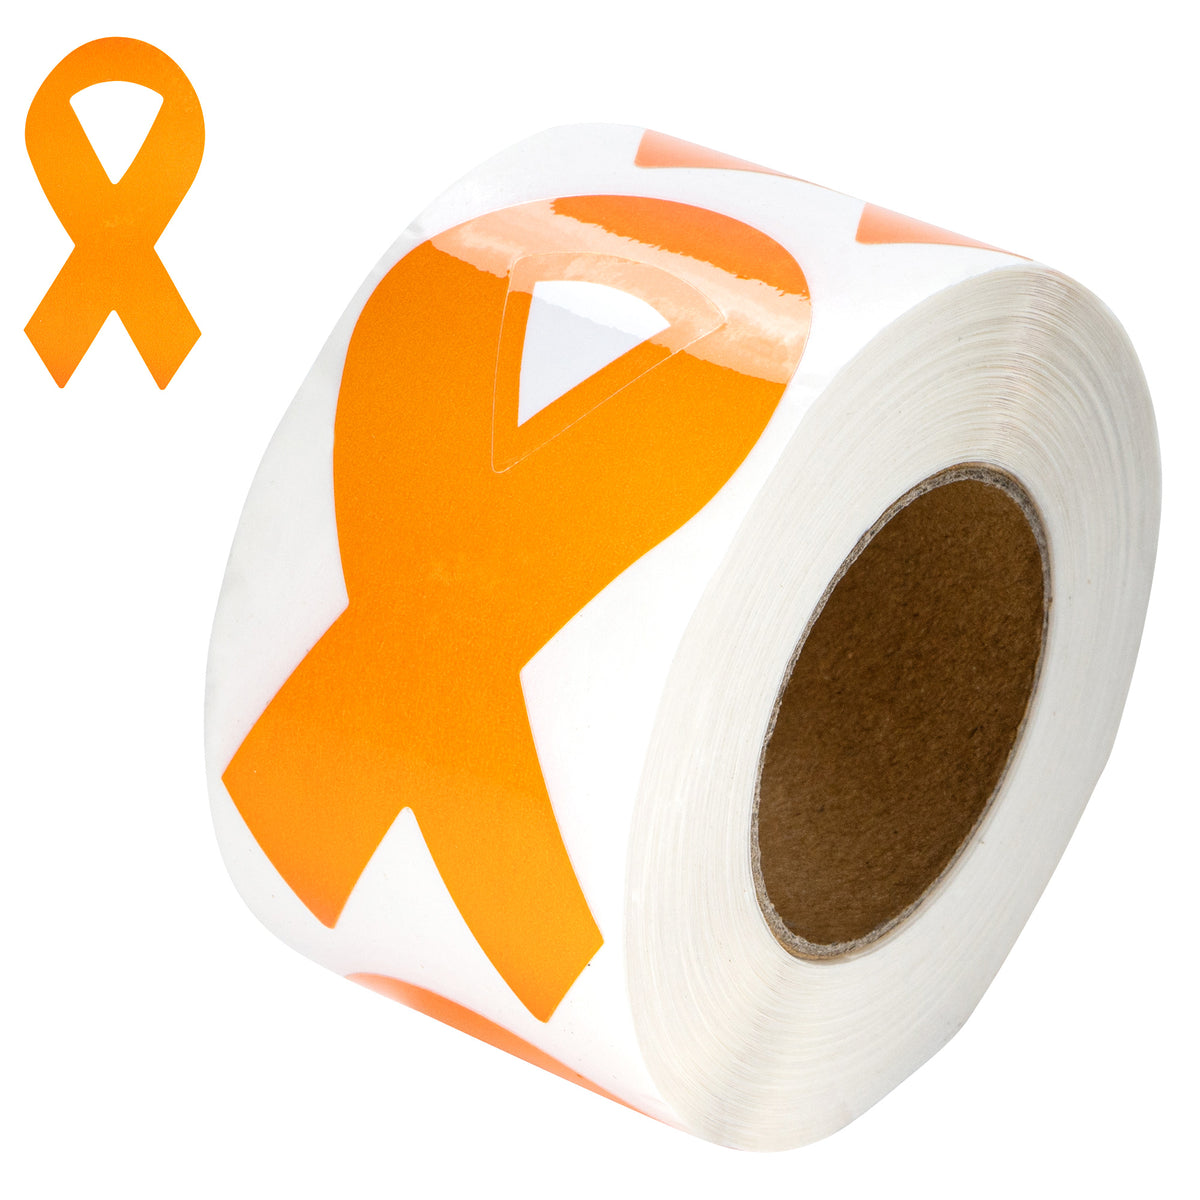 Leukemia Cancer Ribbon, Orange, Printed Vinyl Decal, Sticker, Label for  car, Cell Phone, Window, Computer, Wall, etc. : Sports & Outdoors 